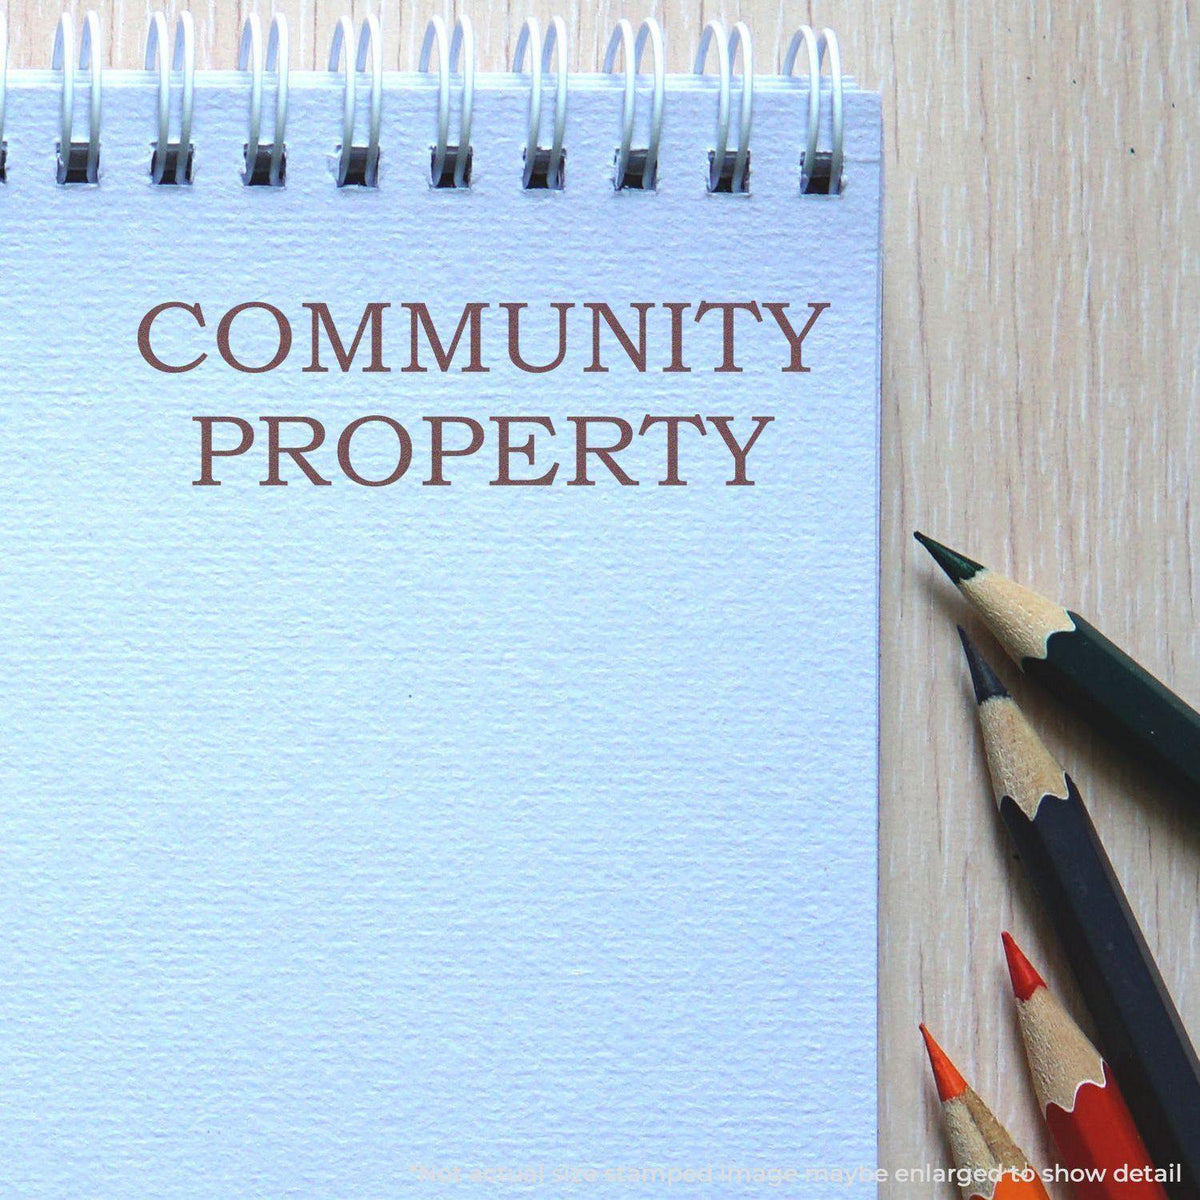 In Use Large Pre Inked Community Property Stamp Image